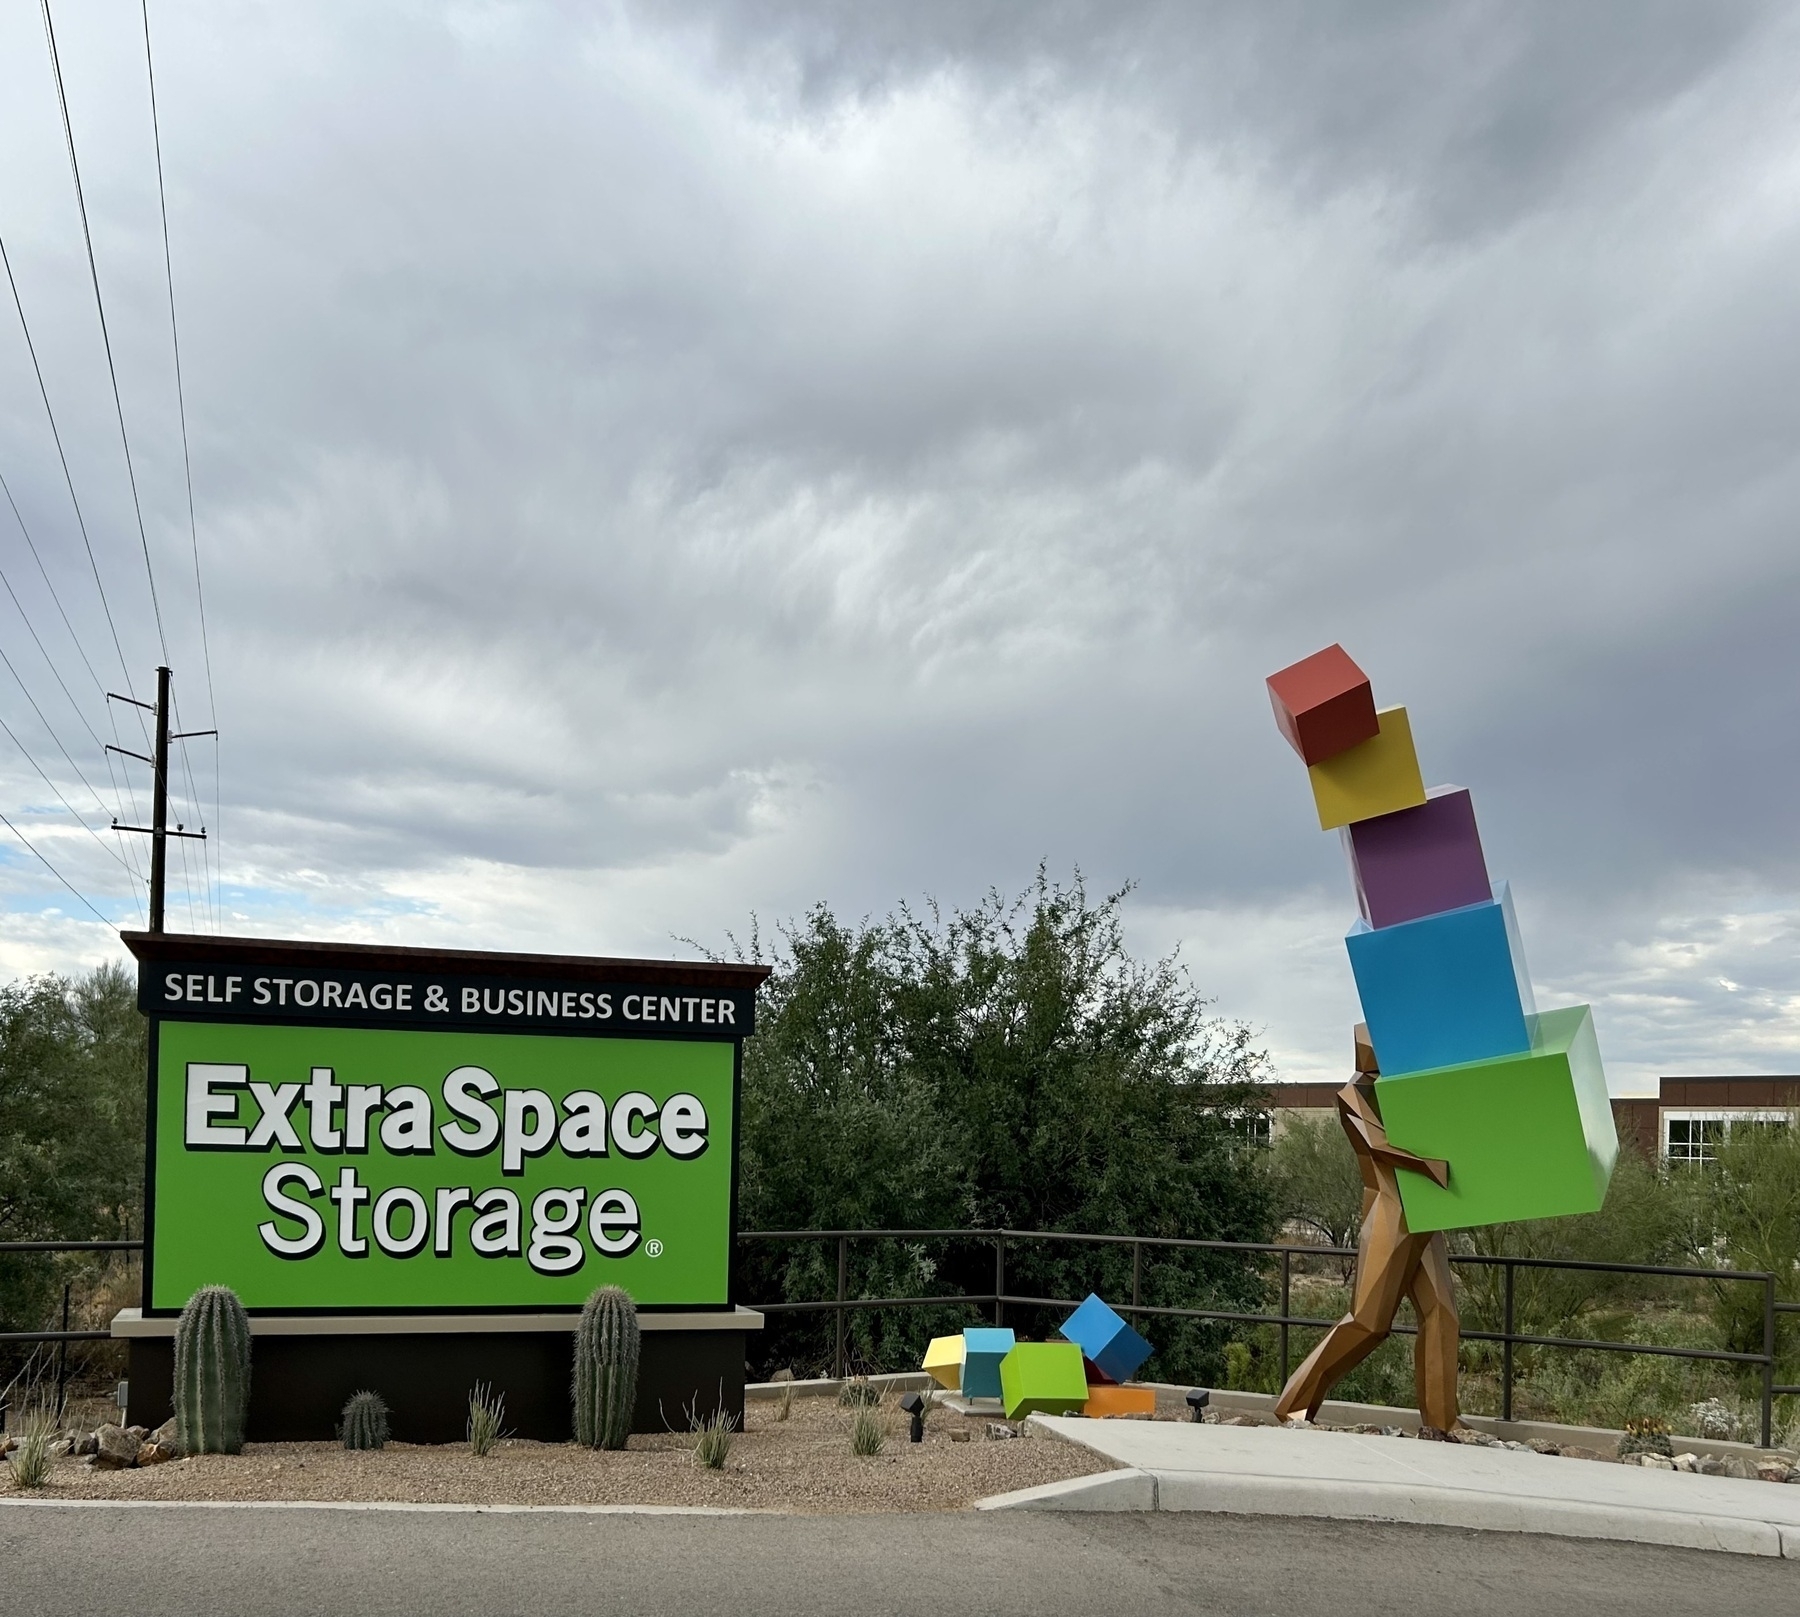 A statue of a man carrying colorful boxes, some of which have fallen on the ground, next to a sign advertising “Extra Space Storage”